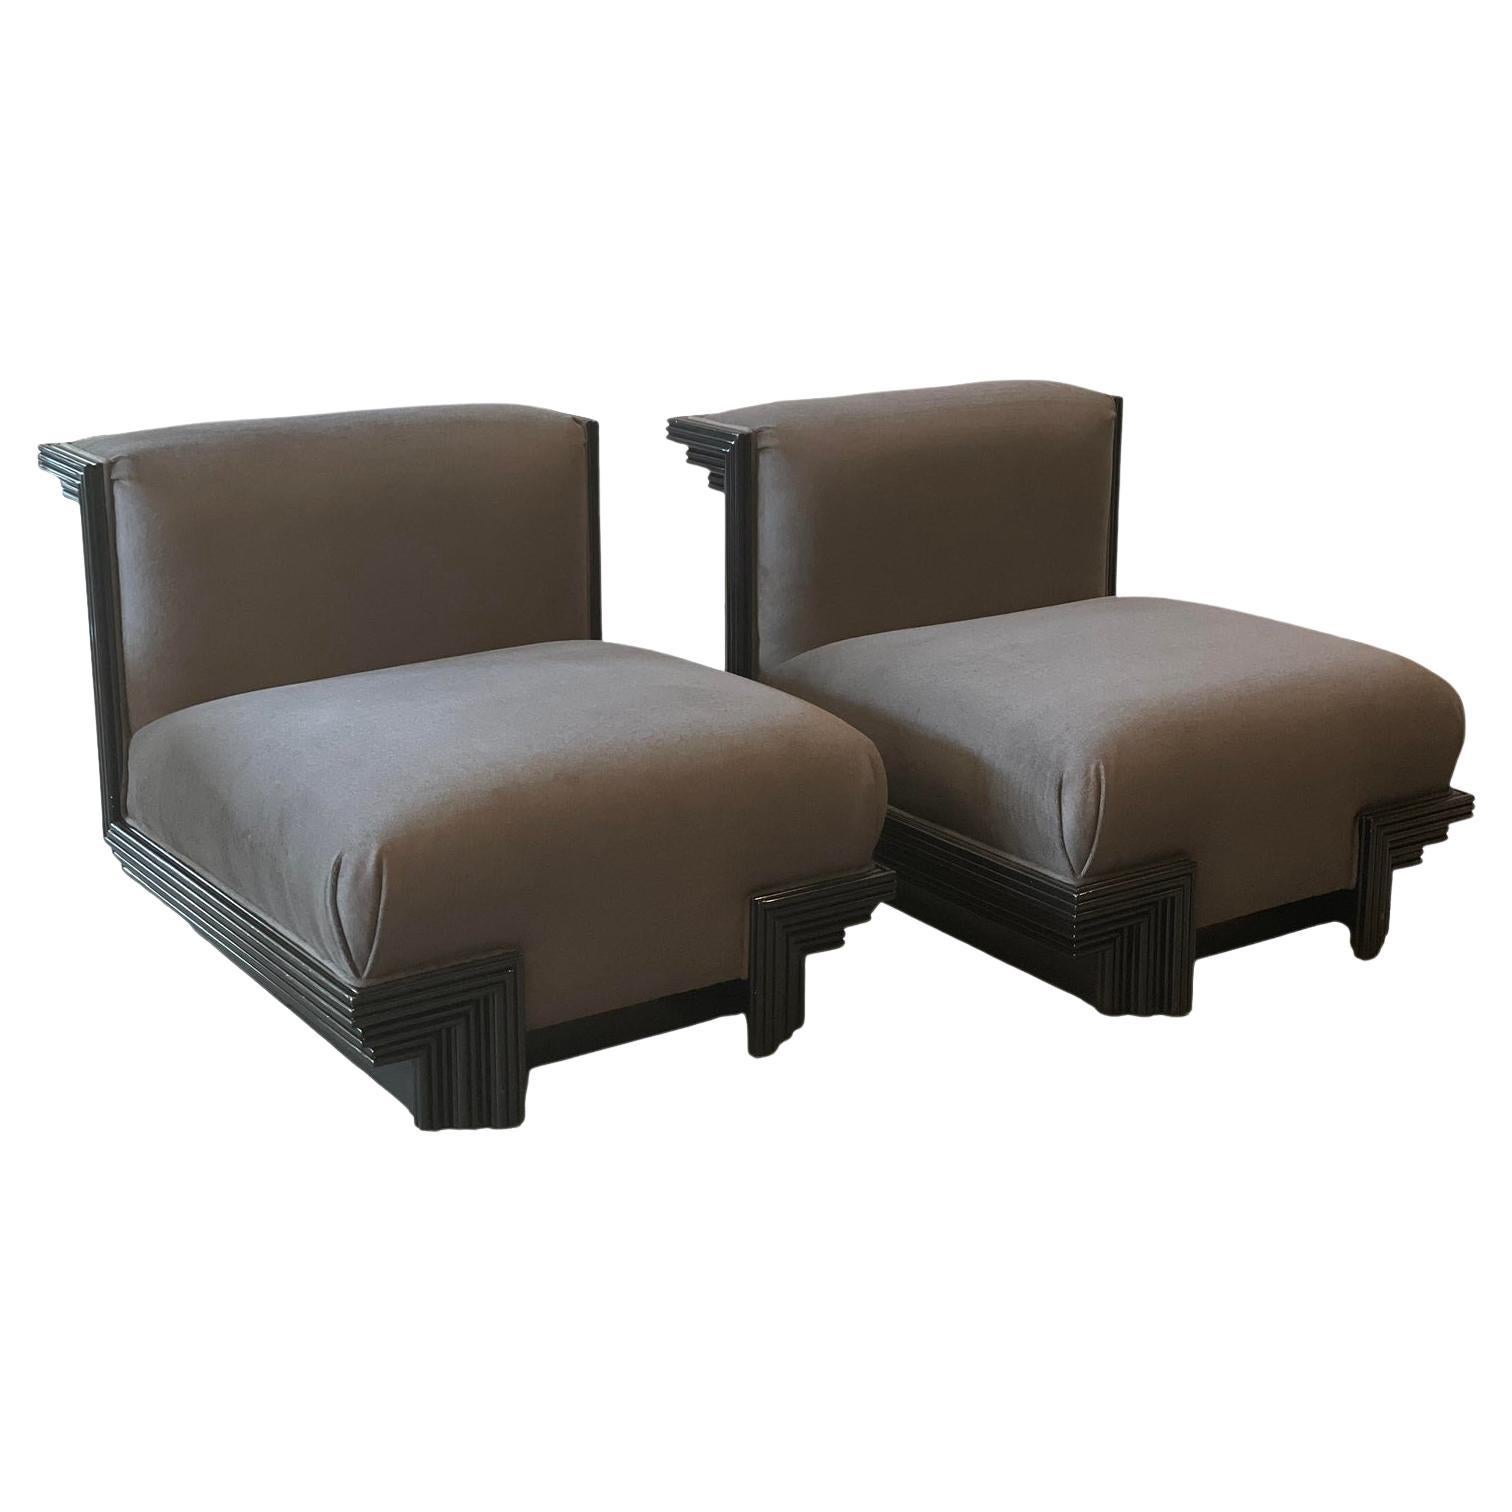 1970s Modern Slipper Chairs in the Manner of James Mont, a Pair For Sale